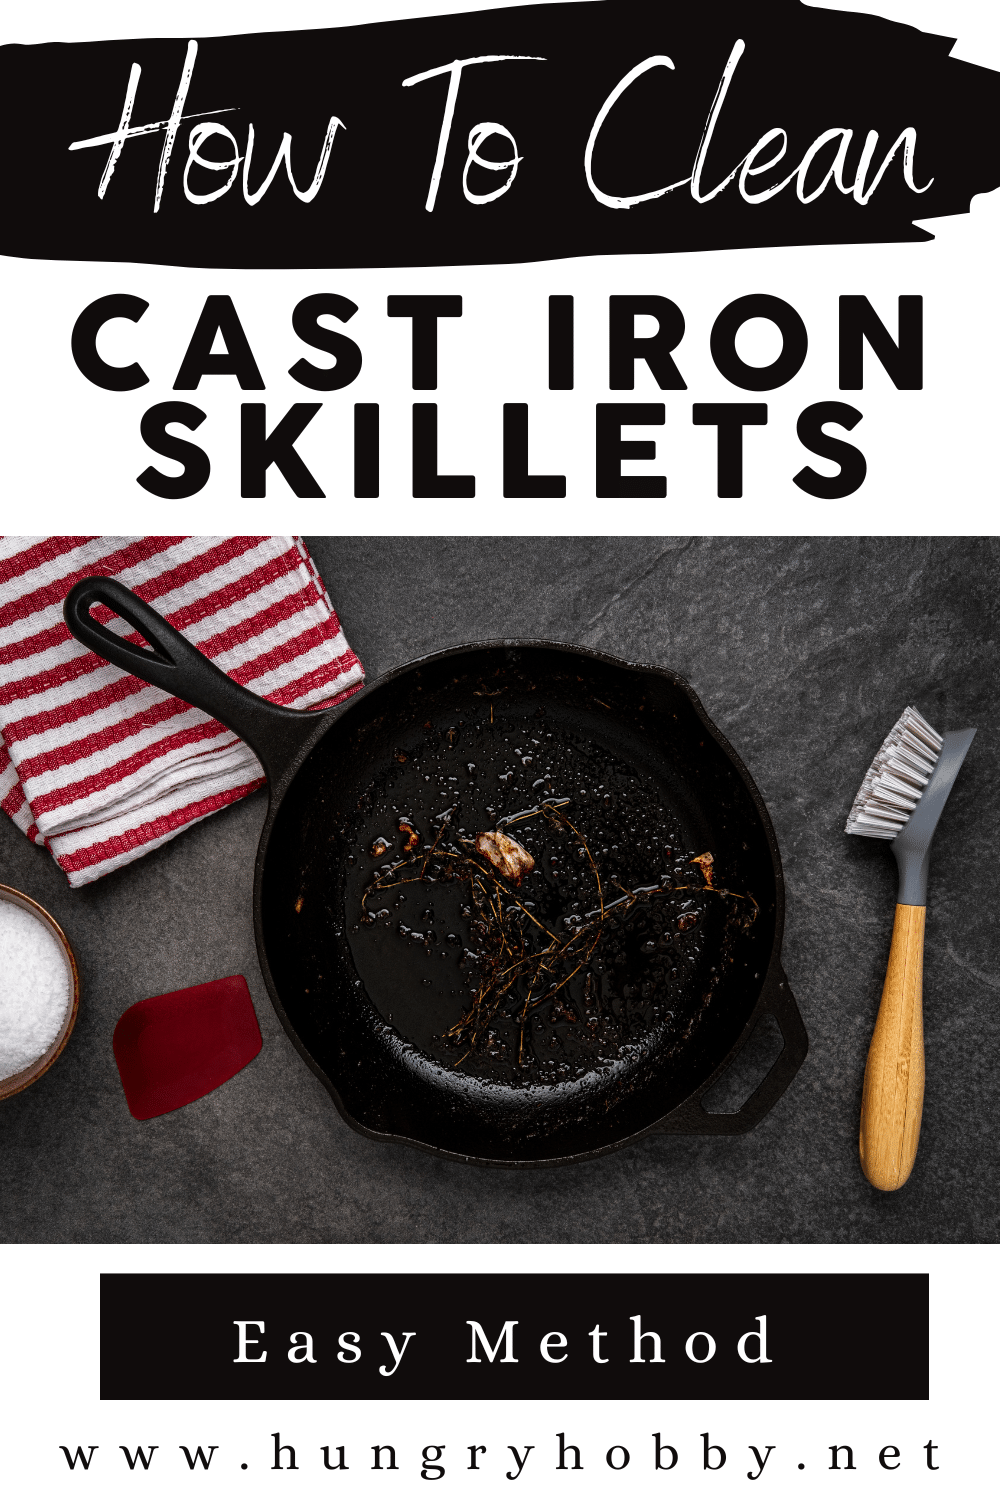 https://hungryhobby.net/wp-content/uploads/2023/04/clean-cast-iron-skillet.png